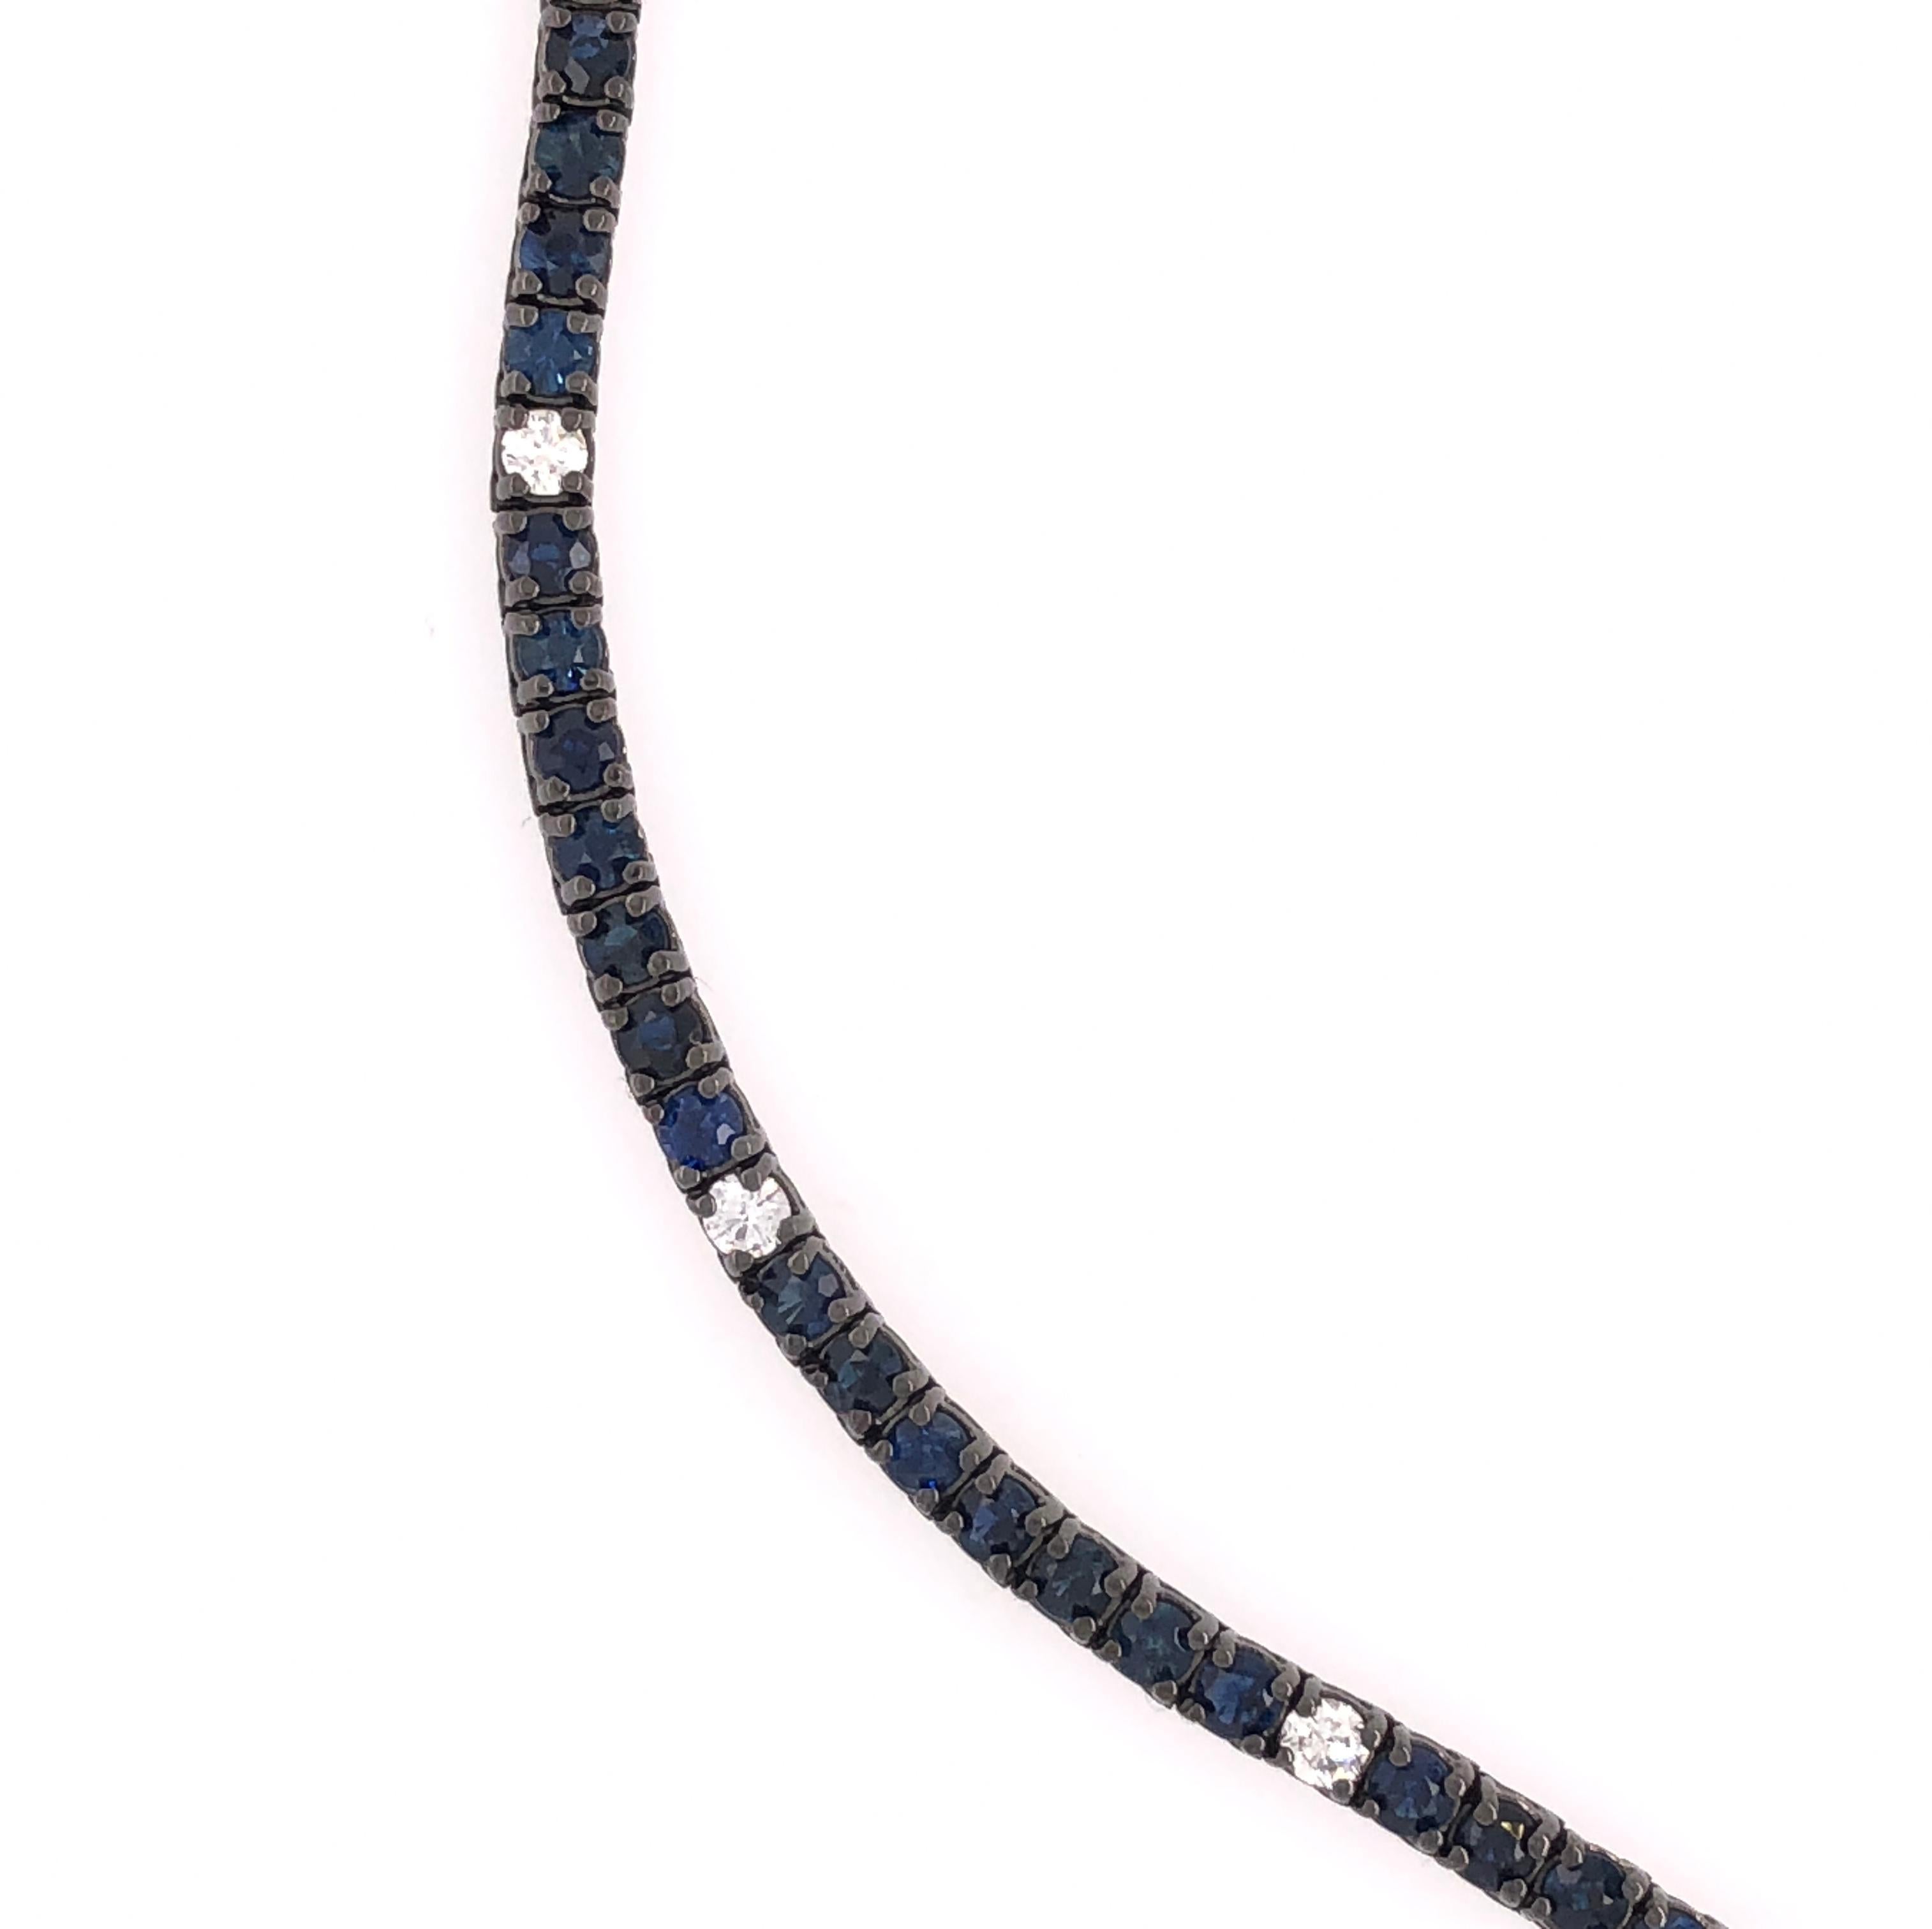 18K Tinted Black Rhodium
Blue Sapphire: 5.06ct total weight.
Diamonds: 0.51ct total weight.
All diamonds are G-H/SI stones.
Width - is approximately 0.3cm/0.12inches.
Length - is approximately 18cm/7.09inches.